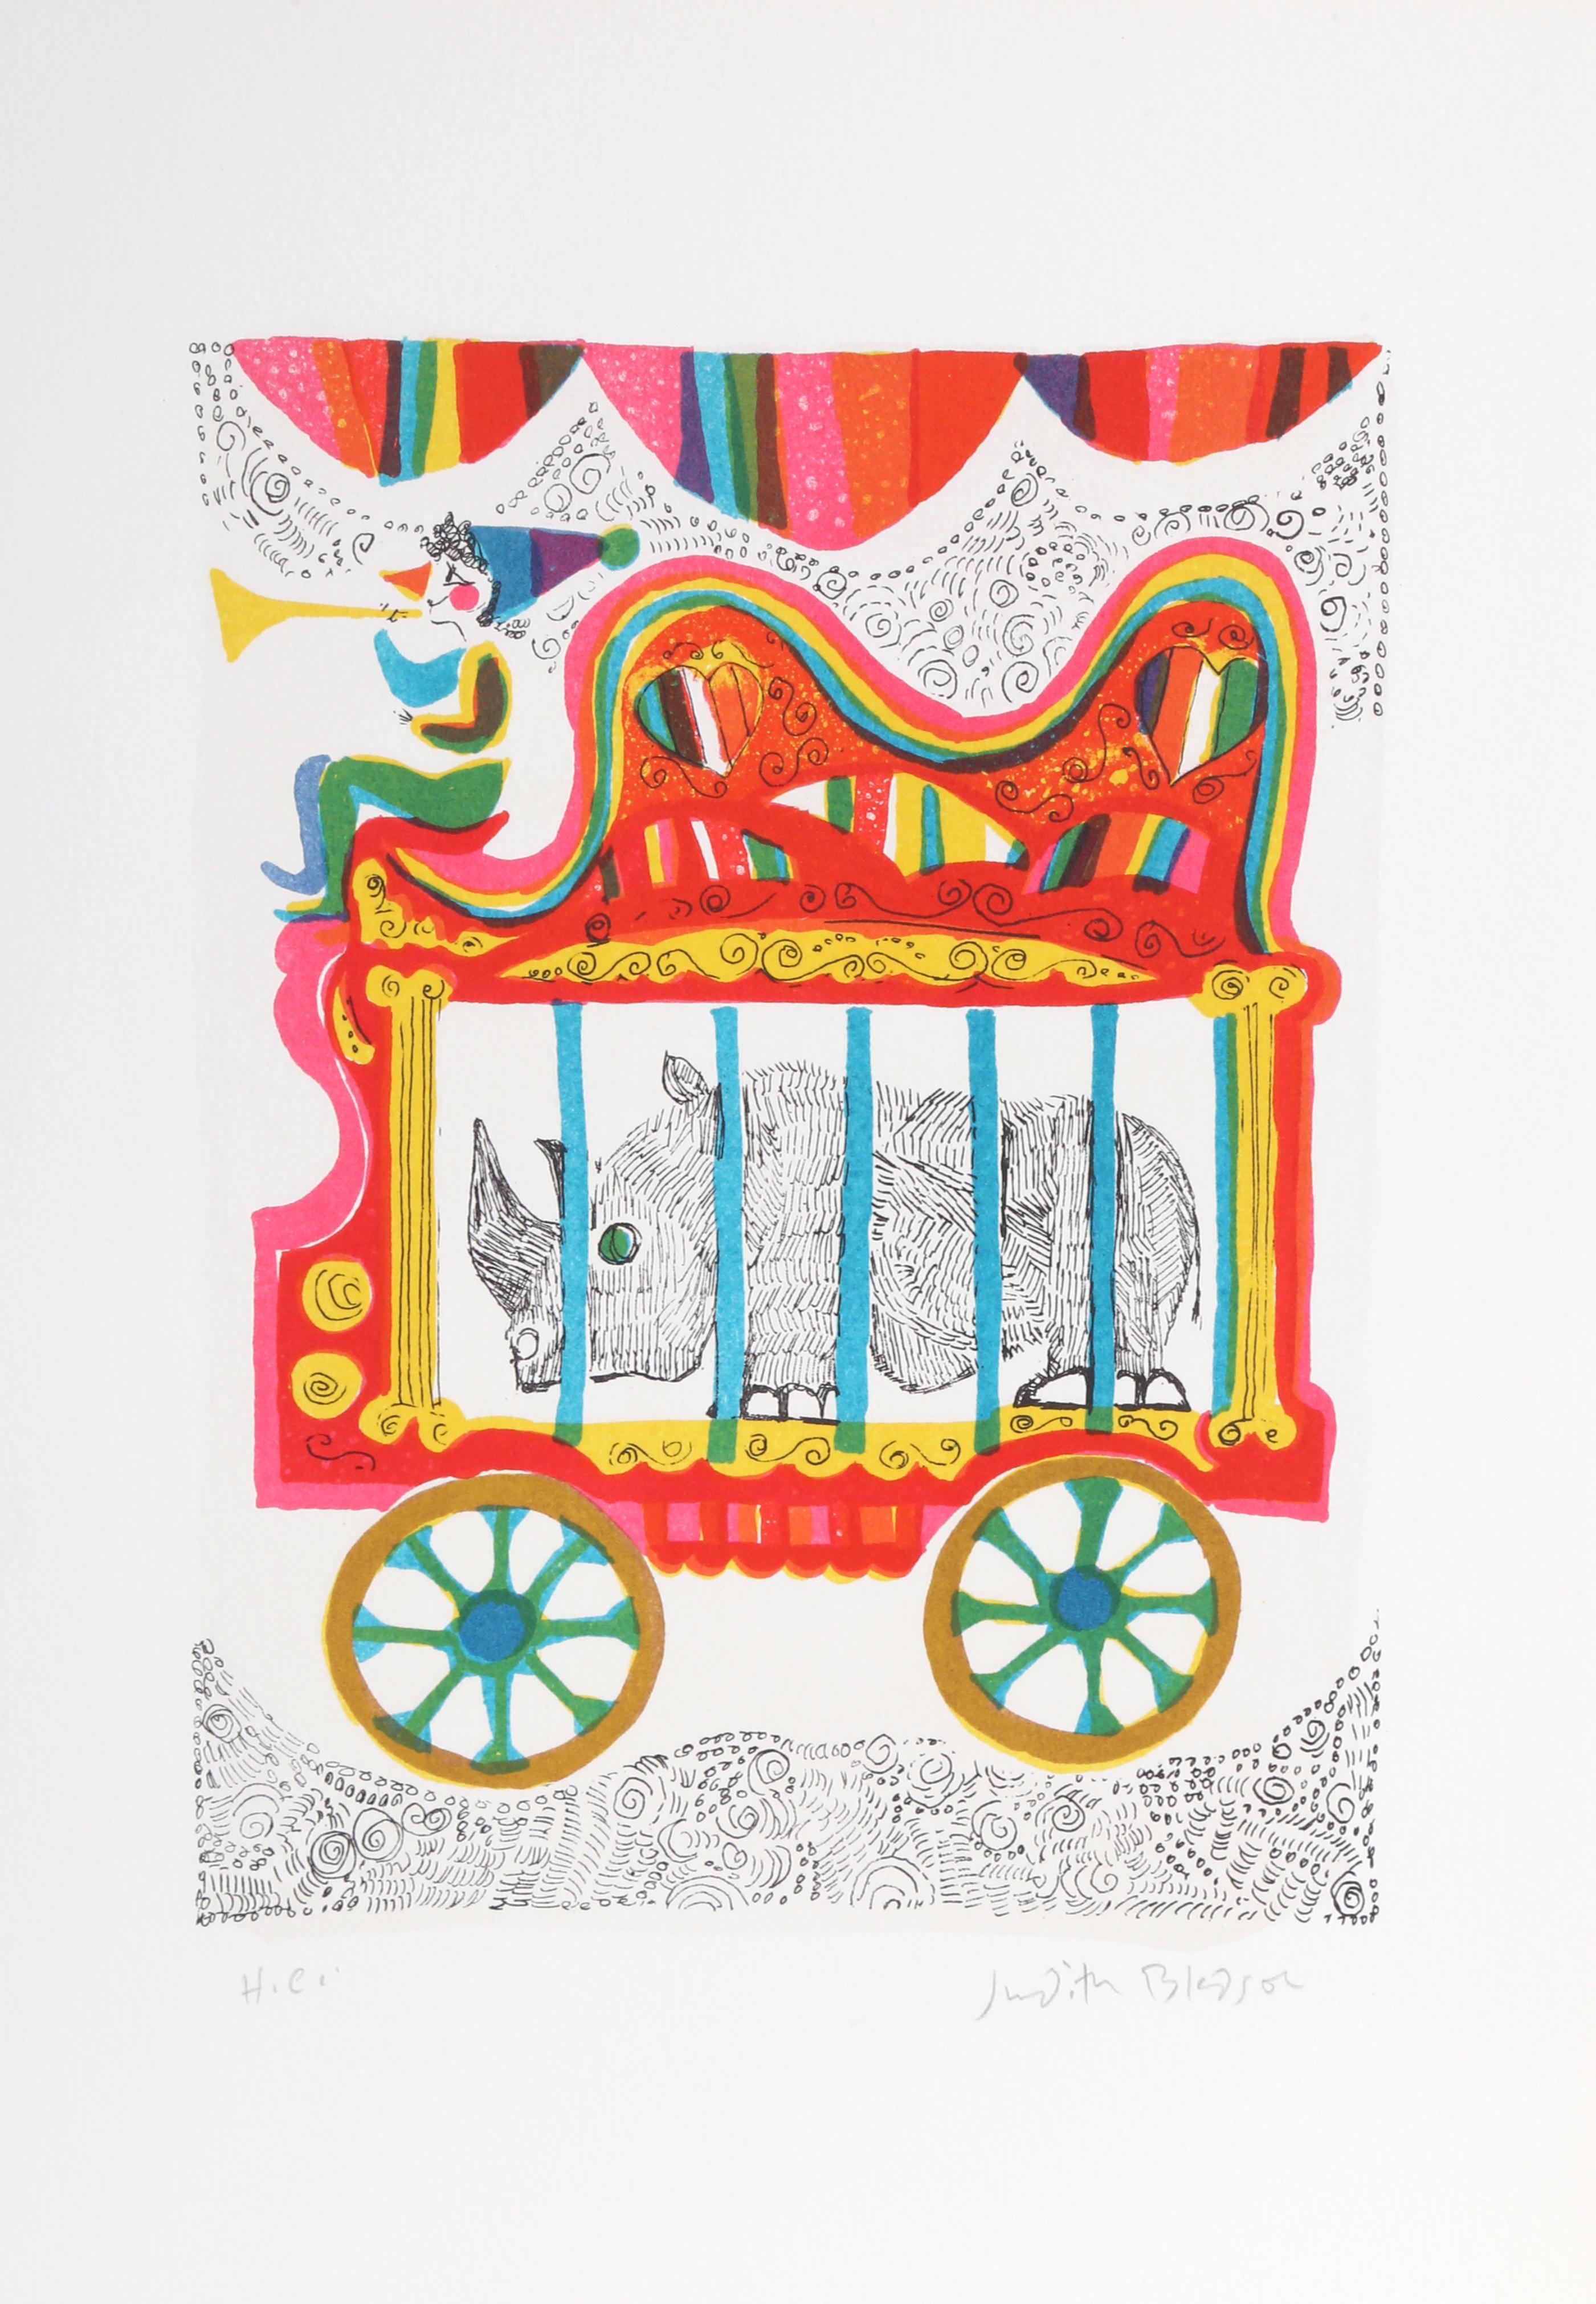 Judith Bledsoe, American (1938 - 2013) -  Rhino from A Little Circus. Year: 1974, Medium: Lithograph, signed in pencil, Edition: HC, Size: 15  x 10.5 in. (38.1  x 26.67 cm), Description: Standing in a rolling cage, the large-horned rhino held